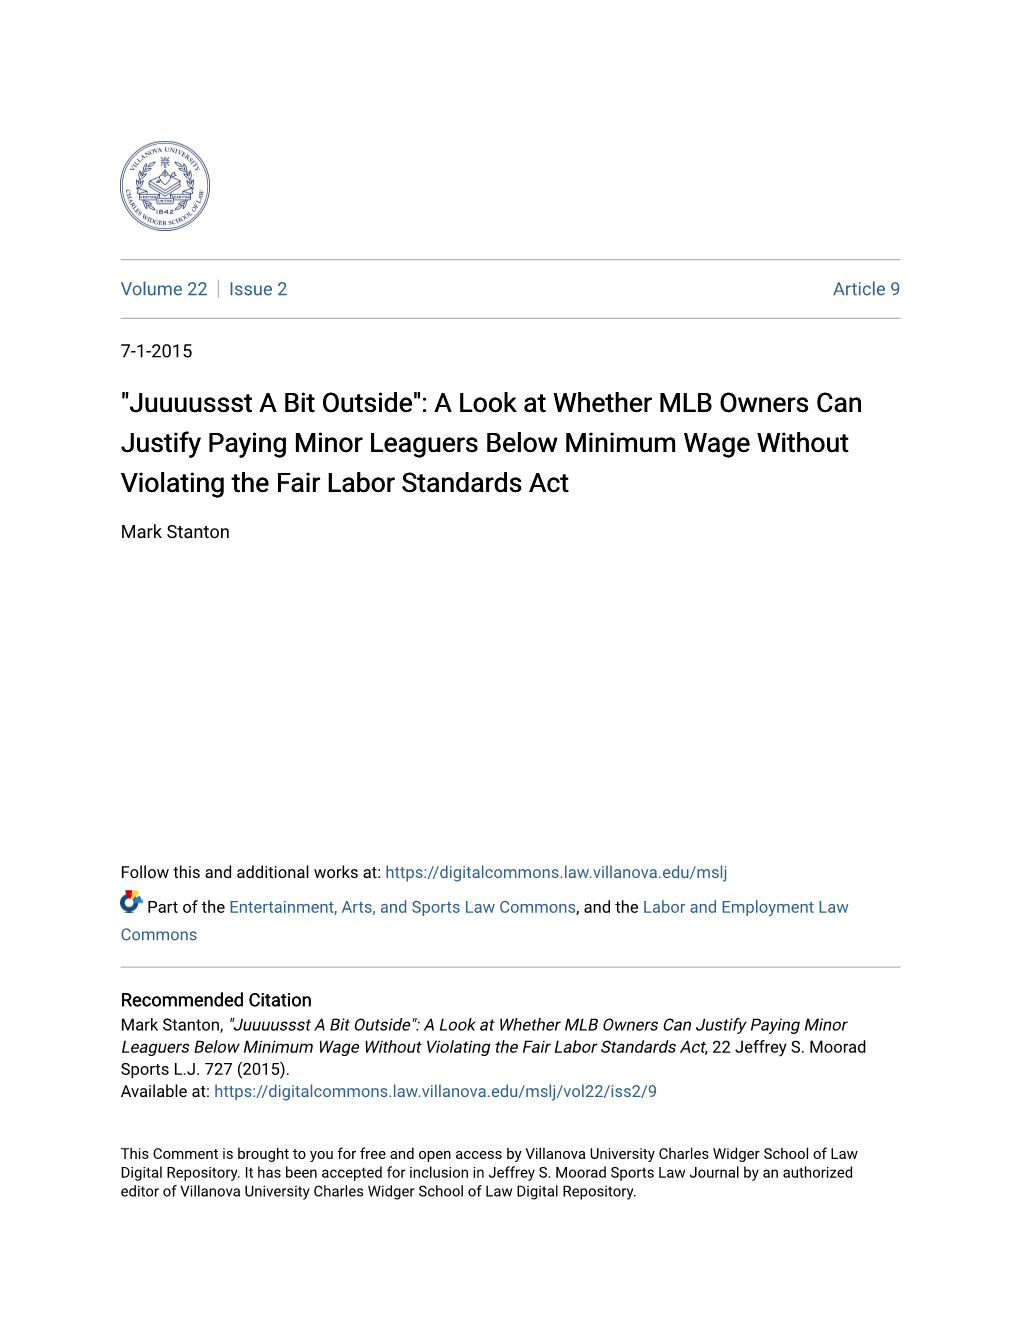 A Look at Whether MLB Owners Can Justify Paying Minor Leaguers Below Minimum Wage Without Violating the Fair Labor Standards Act